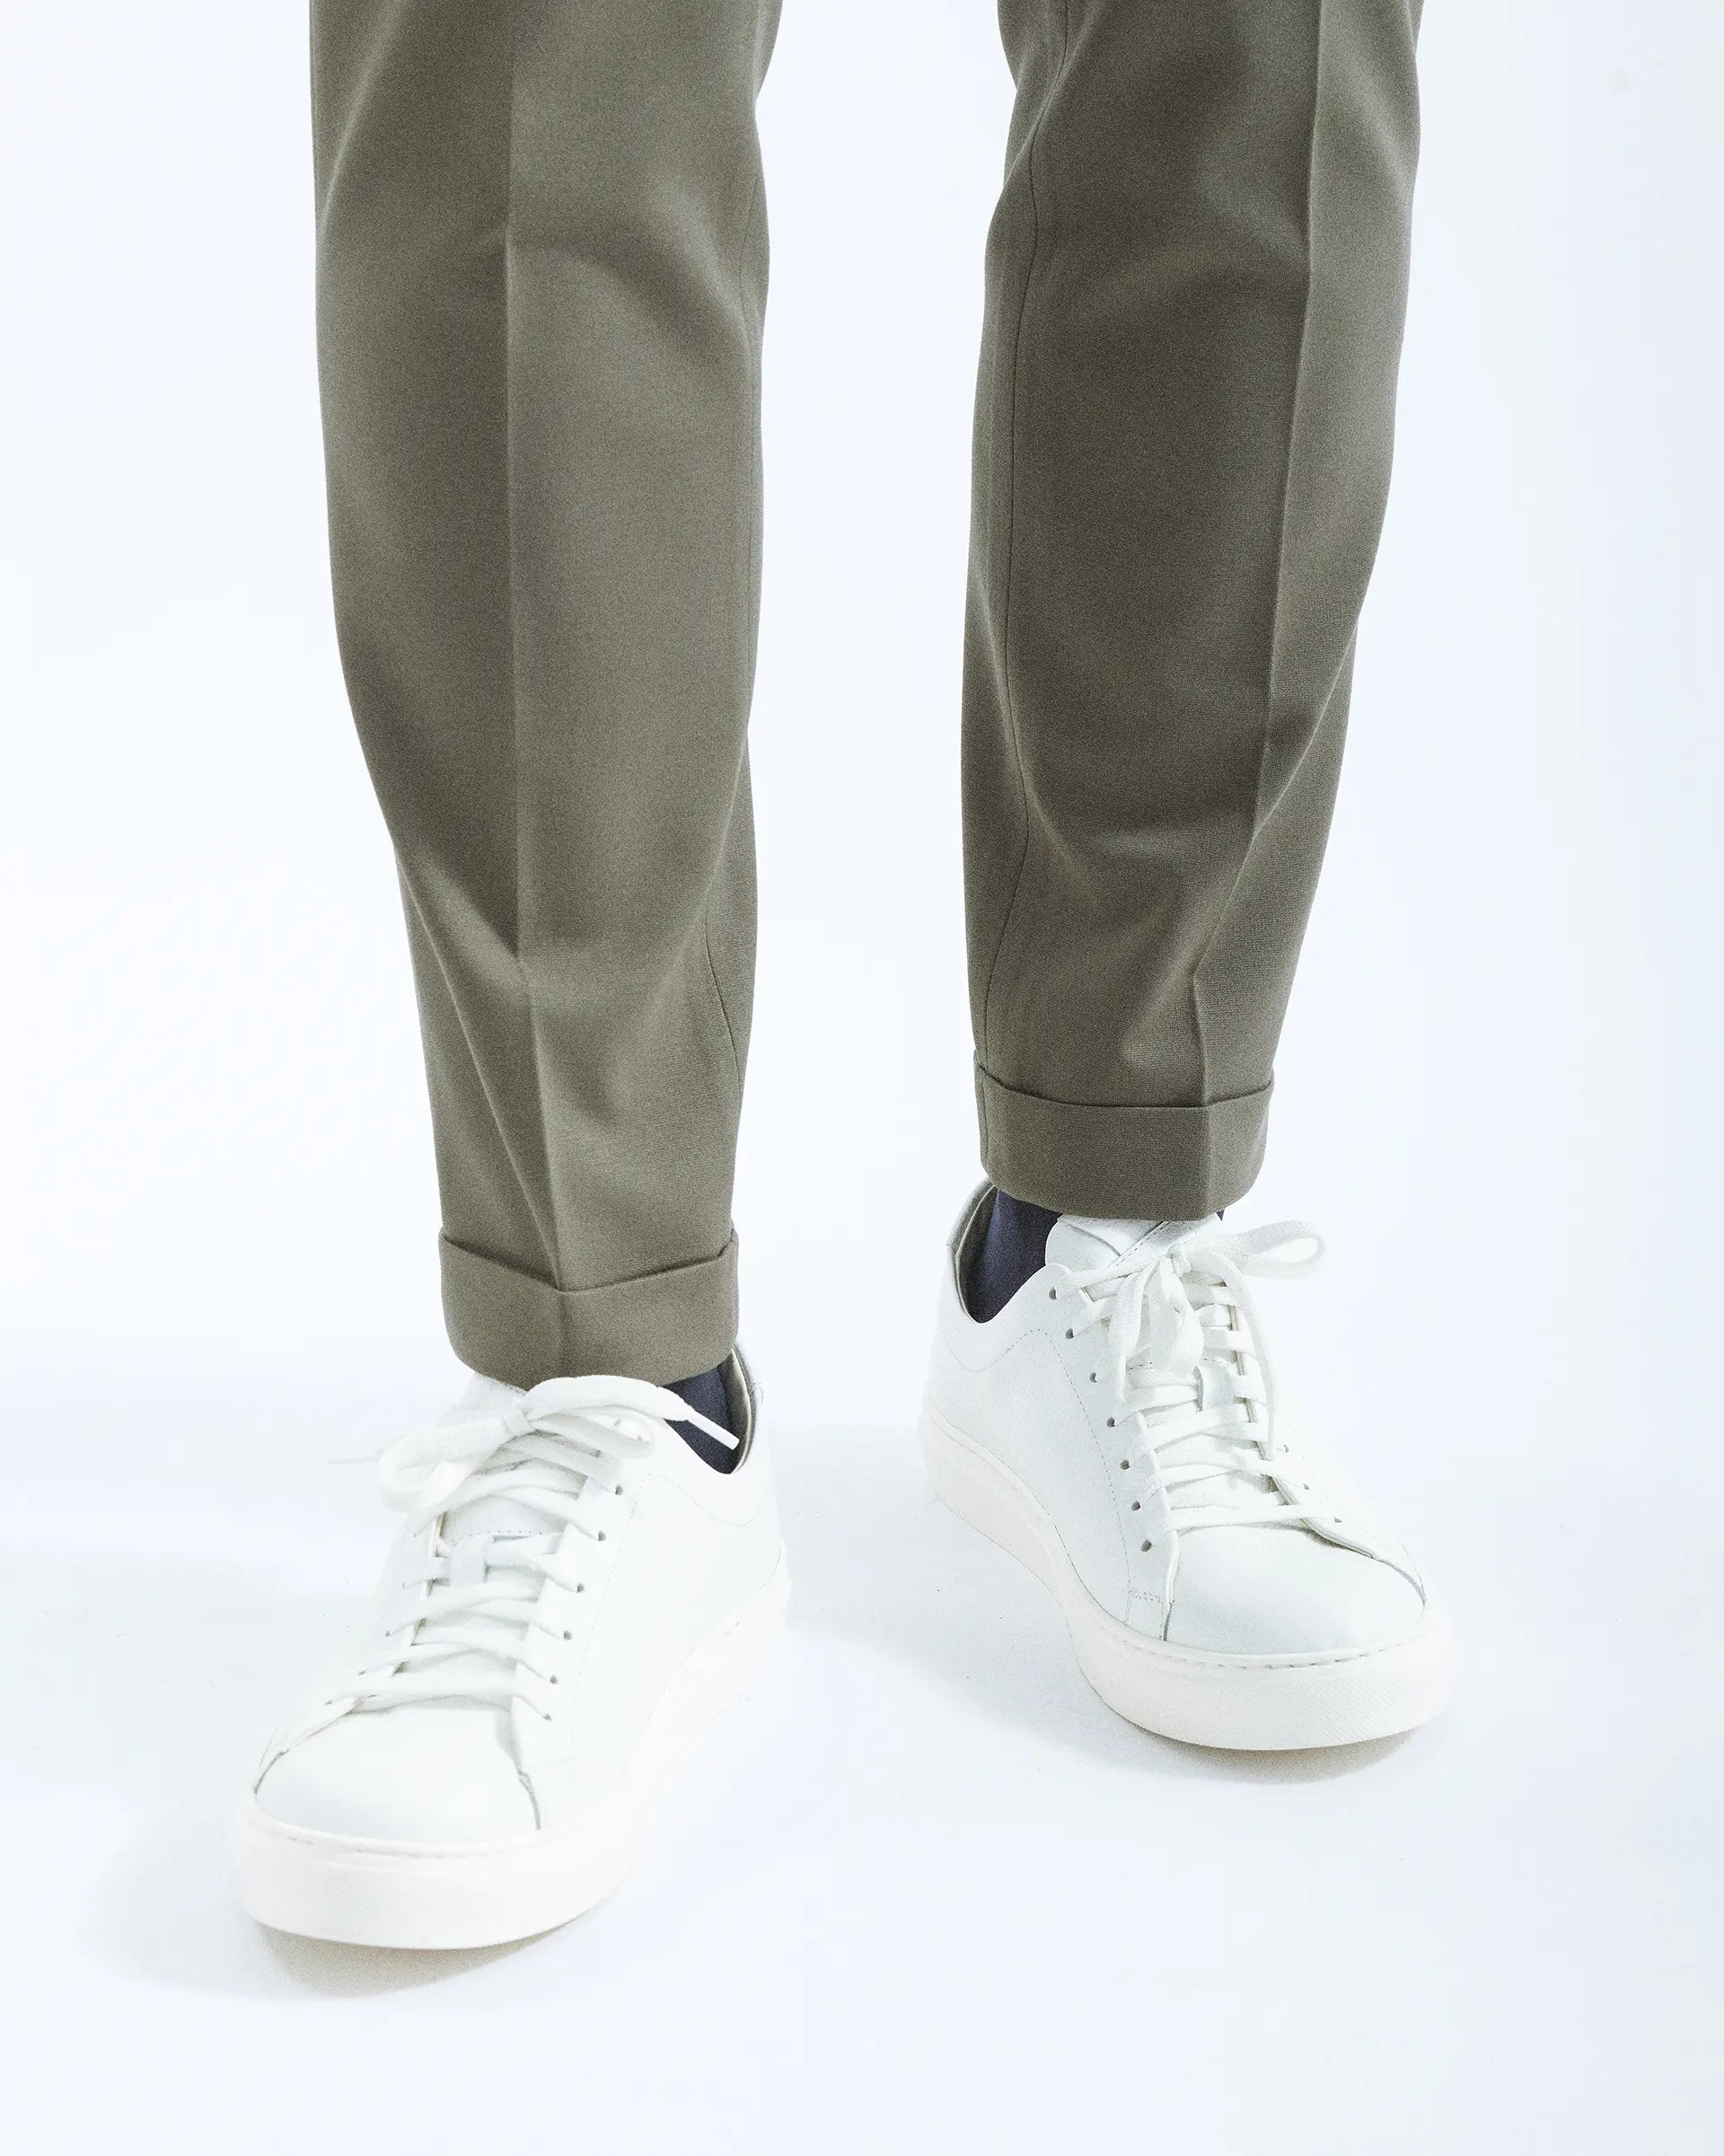 Green Jersey Pants with side buckles